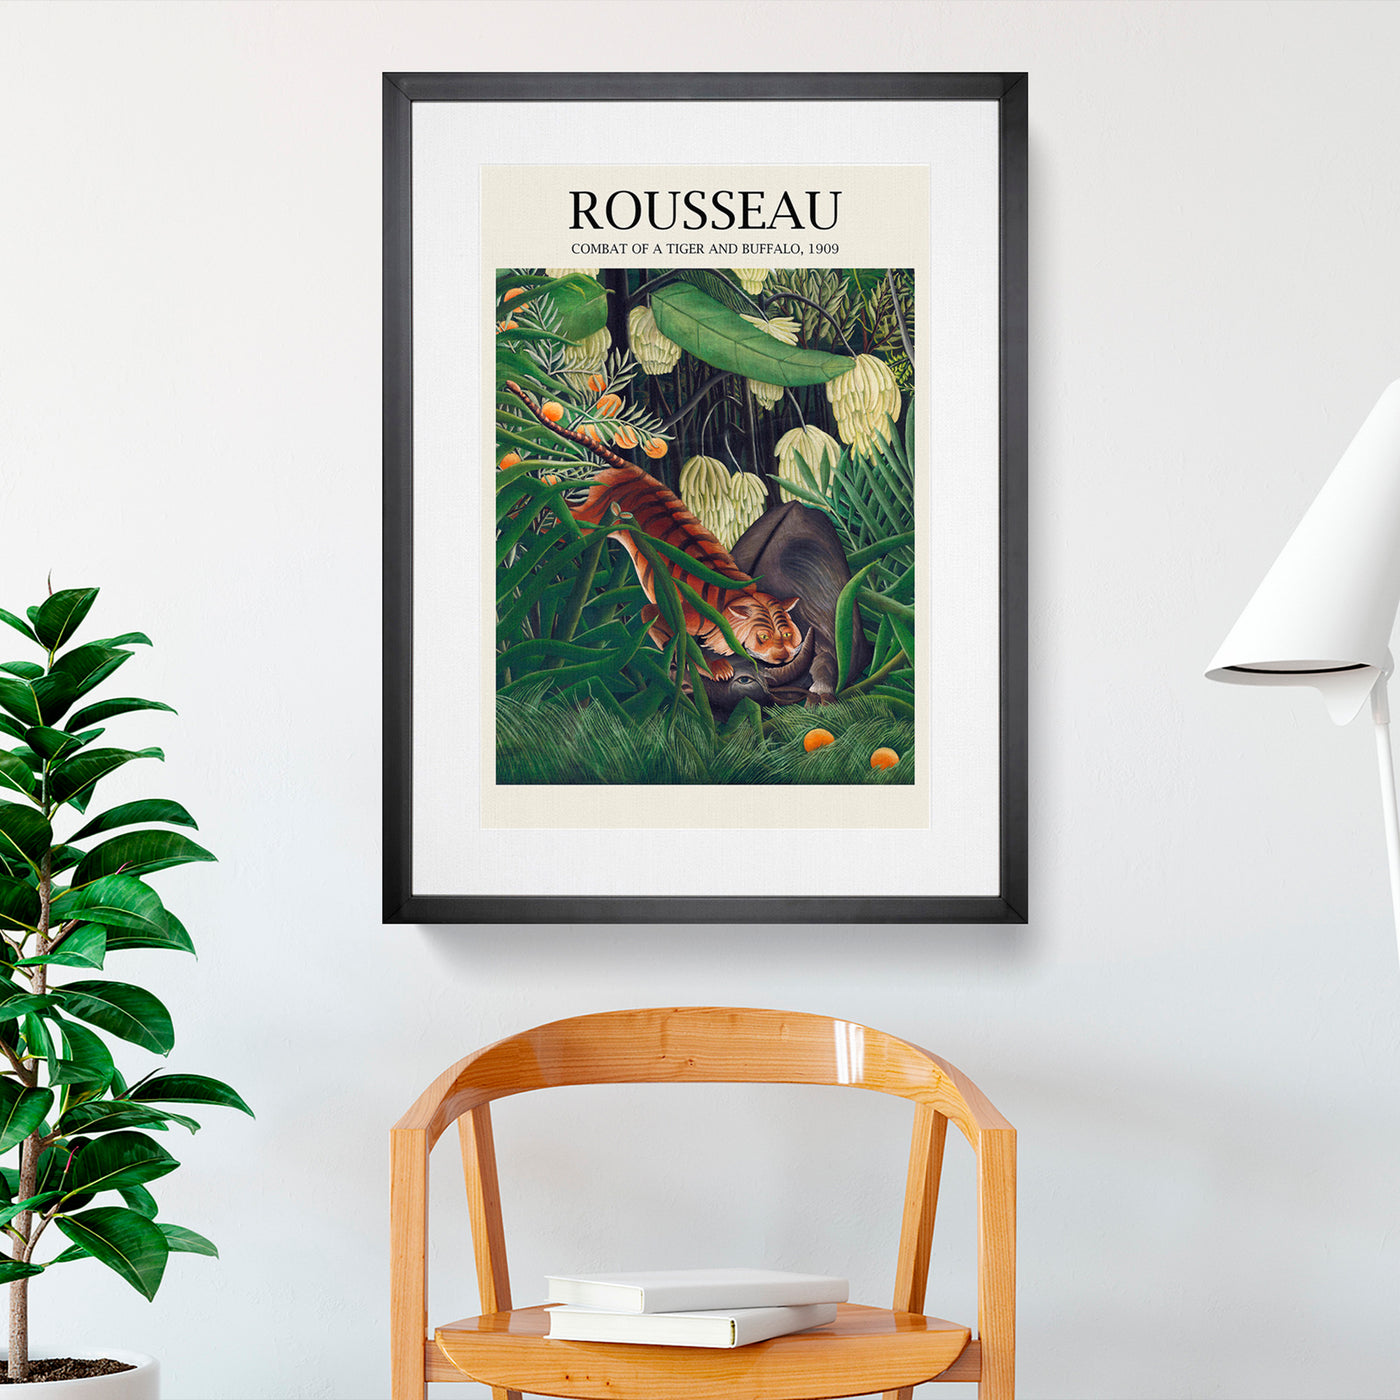 Combat Of A Tiger And Buffalo Vol.2 Print By Henri Rousseau